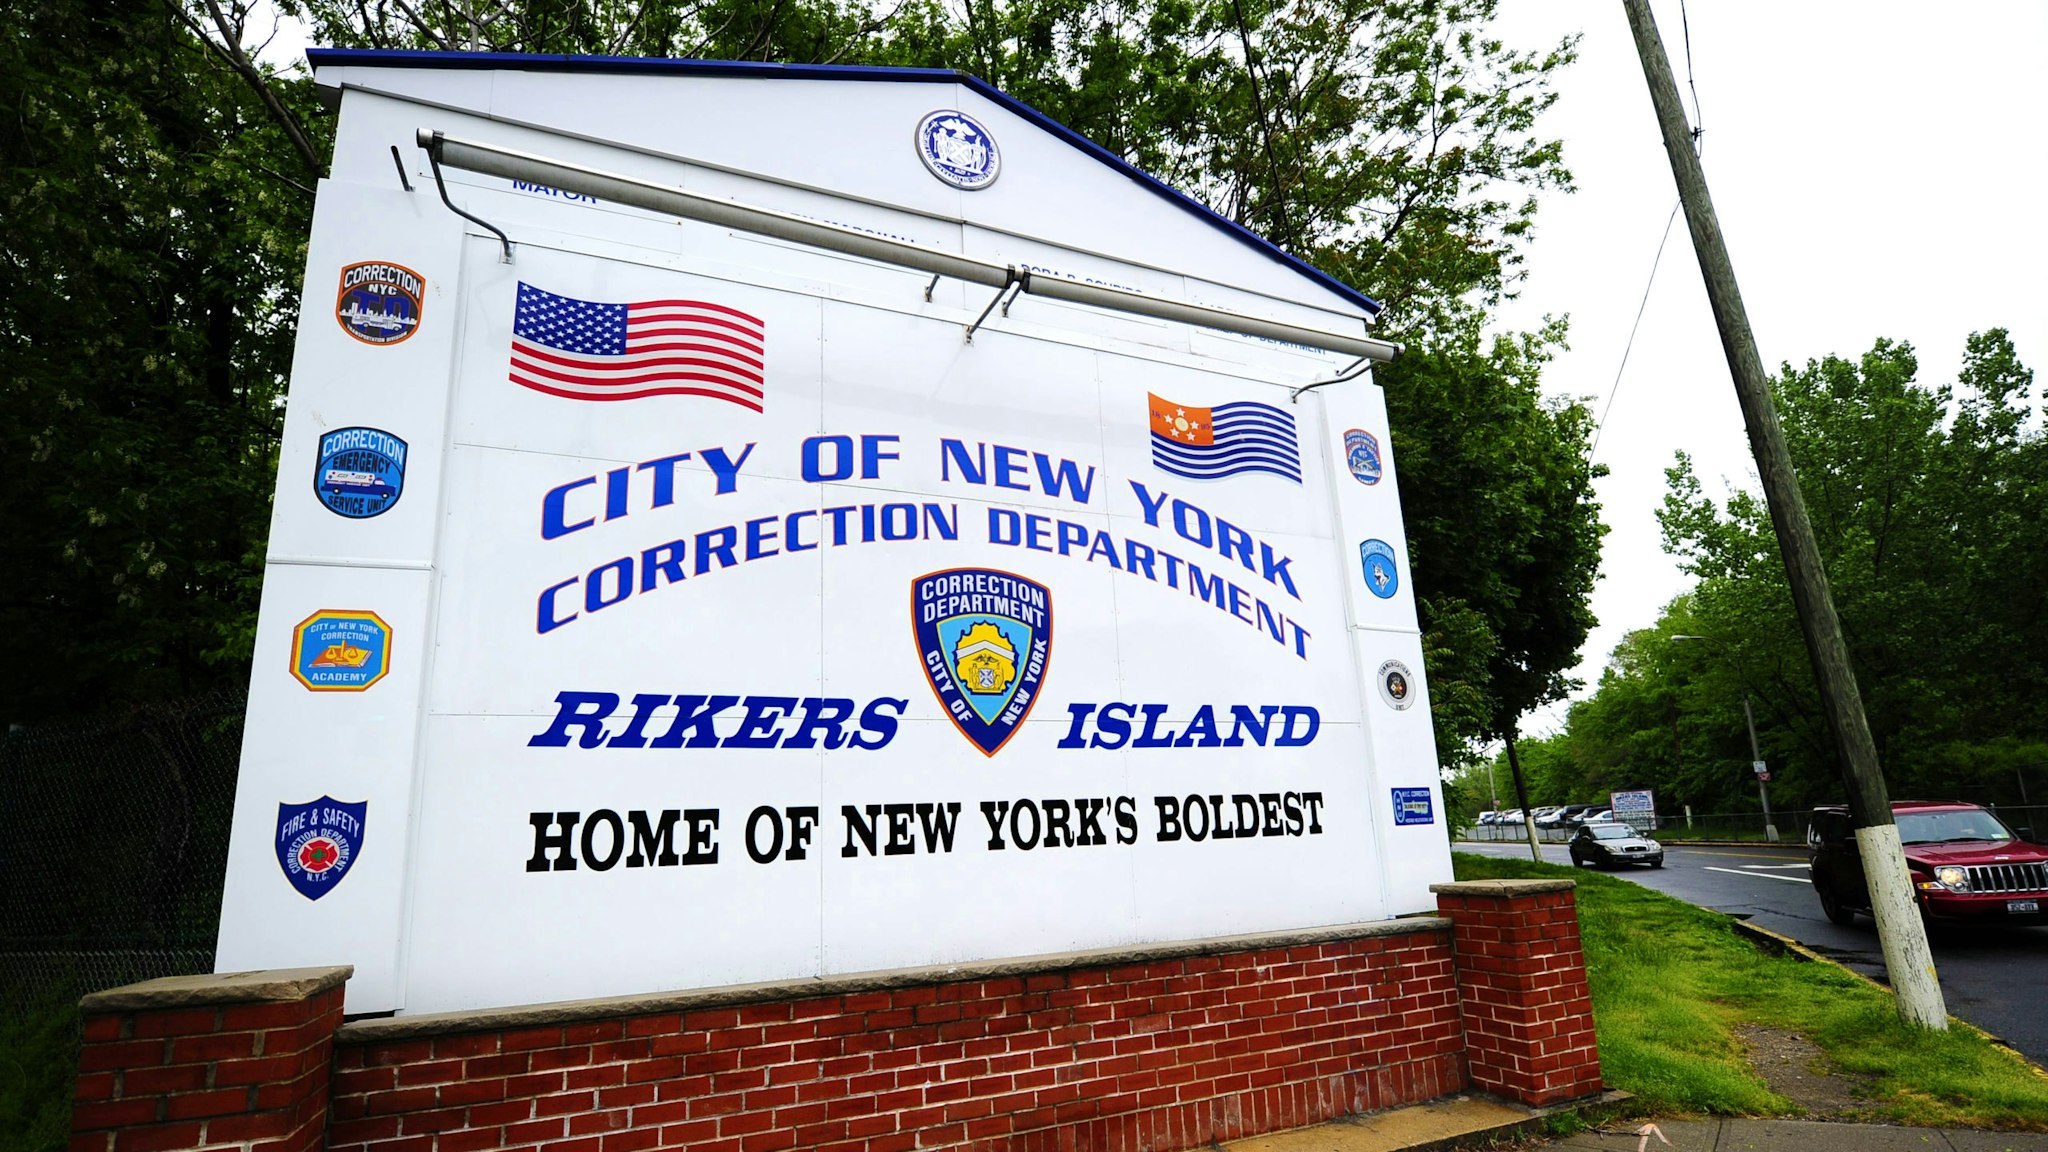 A view of the entrance to Rikers Island penitentiary complex where IMF head Dominique Strauss-Kahn is being held, in New York, May 17, 2011. Strauss-Kahn, the head of the International Monetary Fund and a leading French politician tipped as a presidential front-runner for 2012, was charged in the early hours of Sunday morning with sexual assault and attempted rape.